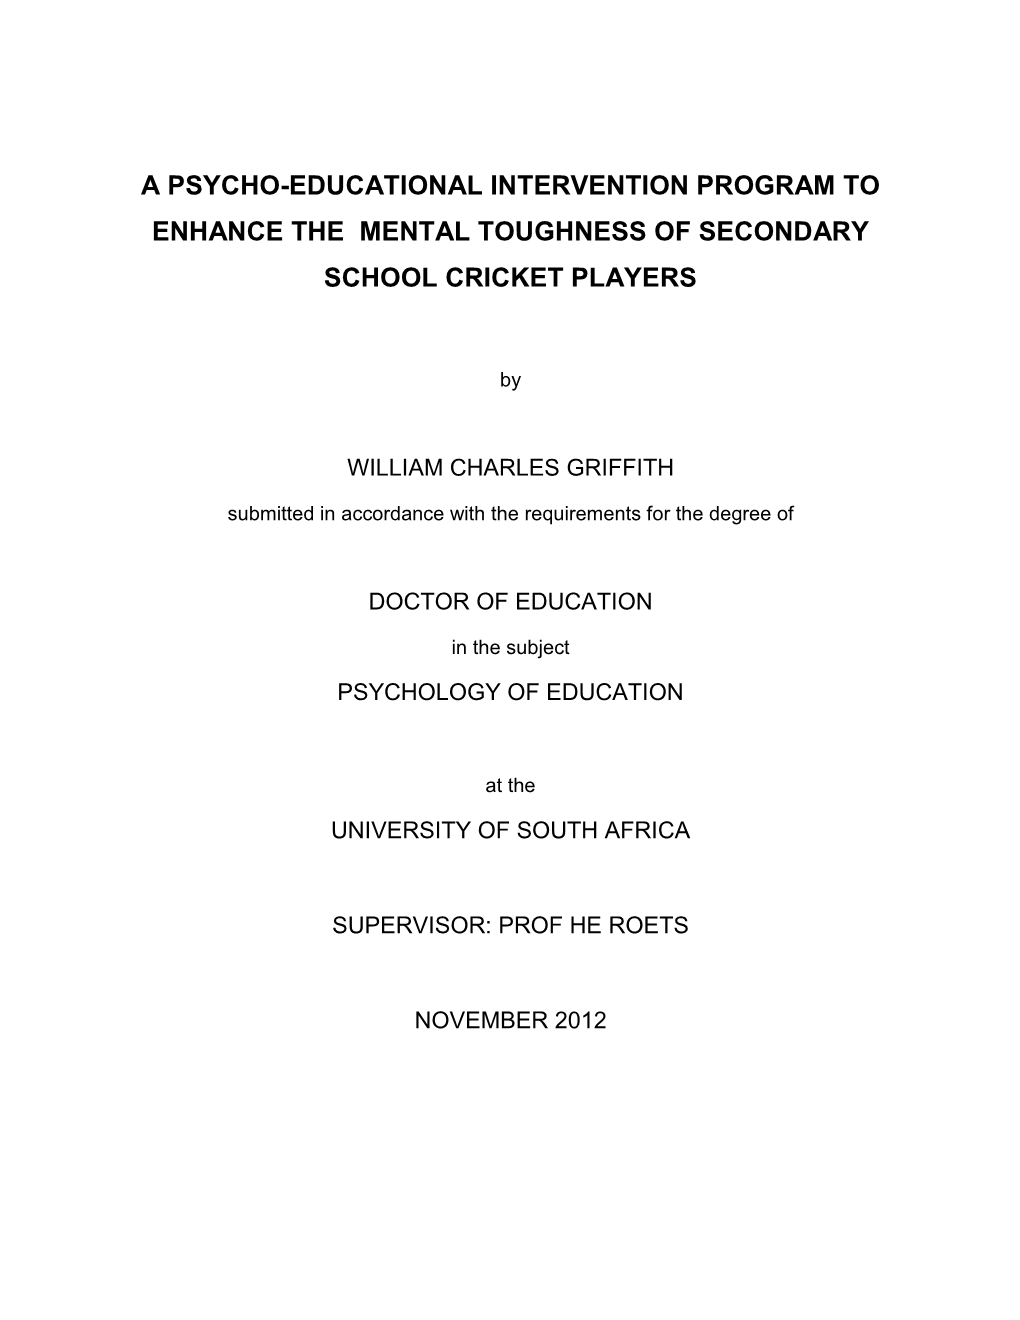 A Psycho-Educational Intervention Program to Enhance the Mental Toughness of Secondary School Cricket Players